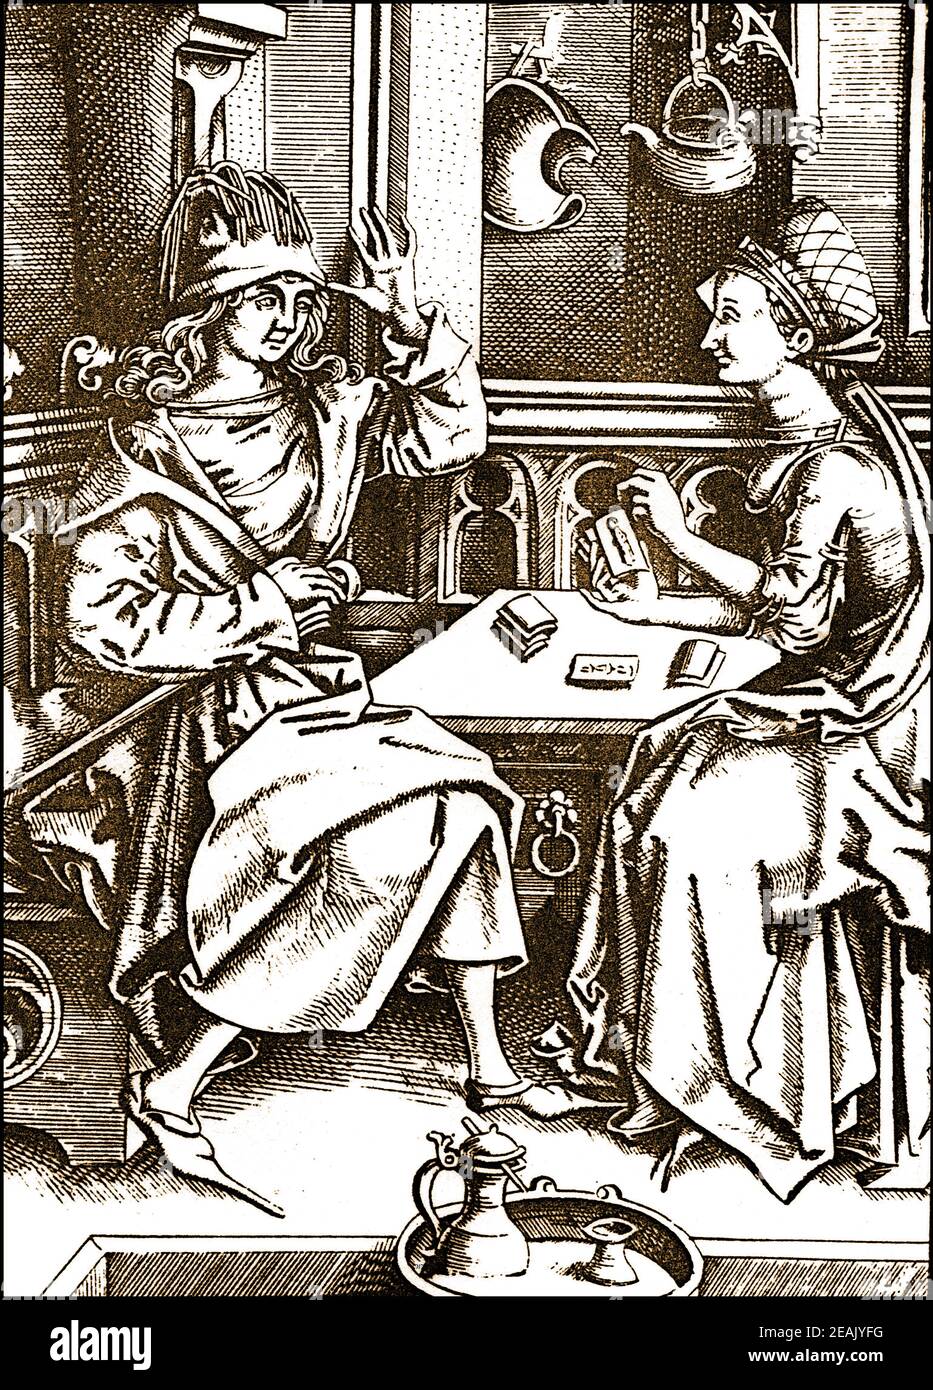 A scene showing a medieval man having his fortune told by a tarot reader. Stock Photo